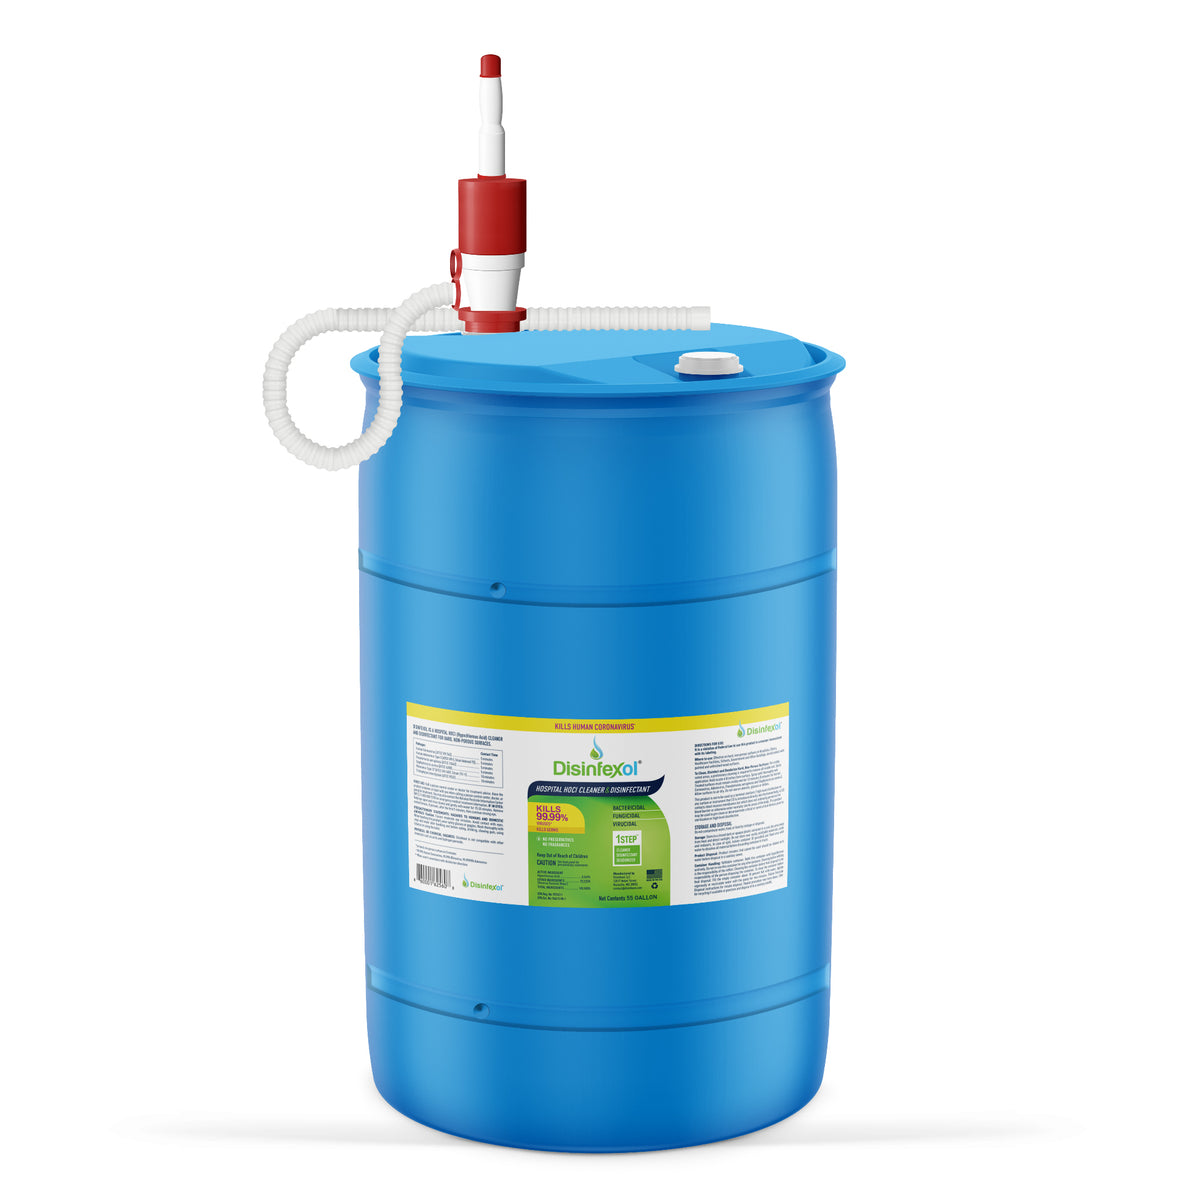 Disinfexol HOCl Disinfectant Cleaning Spray - 55 or 15 Gallon Drum (INCLUDES a Siphon Drum Pump)